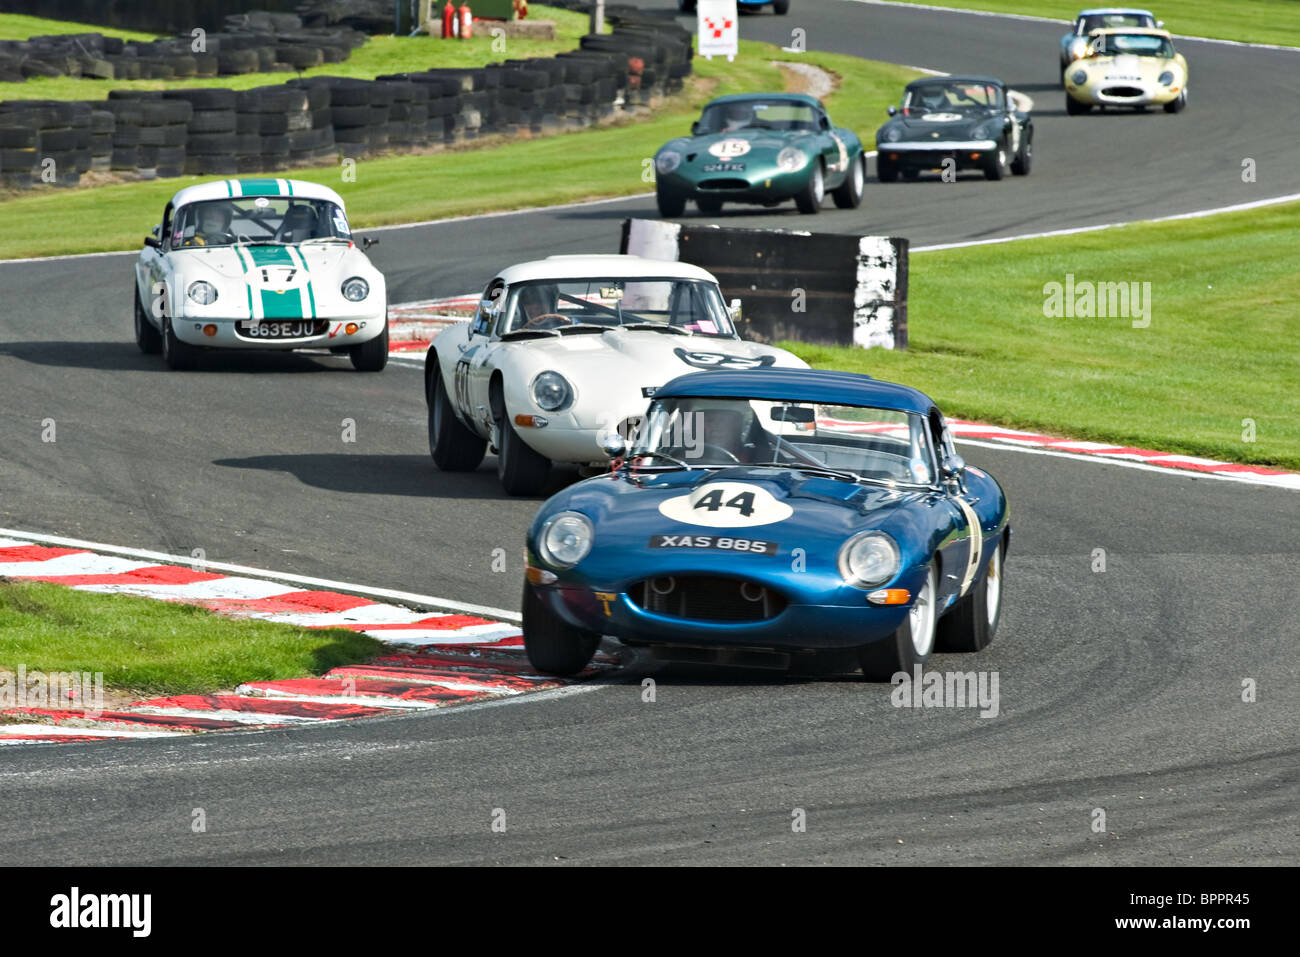 Five E Type Jaguar Race Cars and Two Lotus Elans Negotiate Brittens at Oulton Park Motor Racing Circuit Cheshire England UK Stock Photo